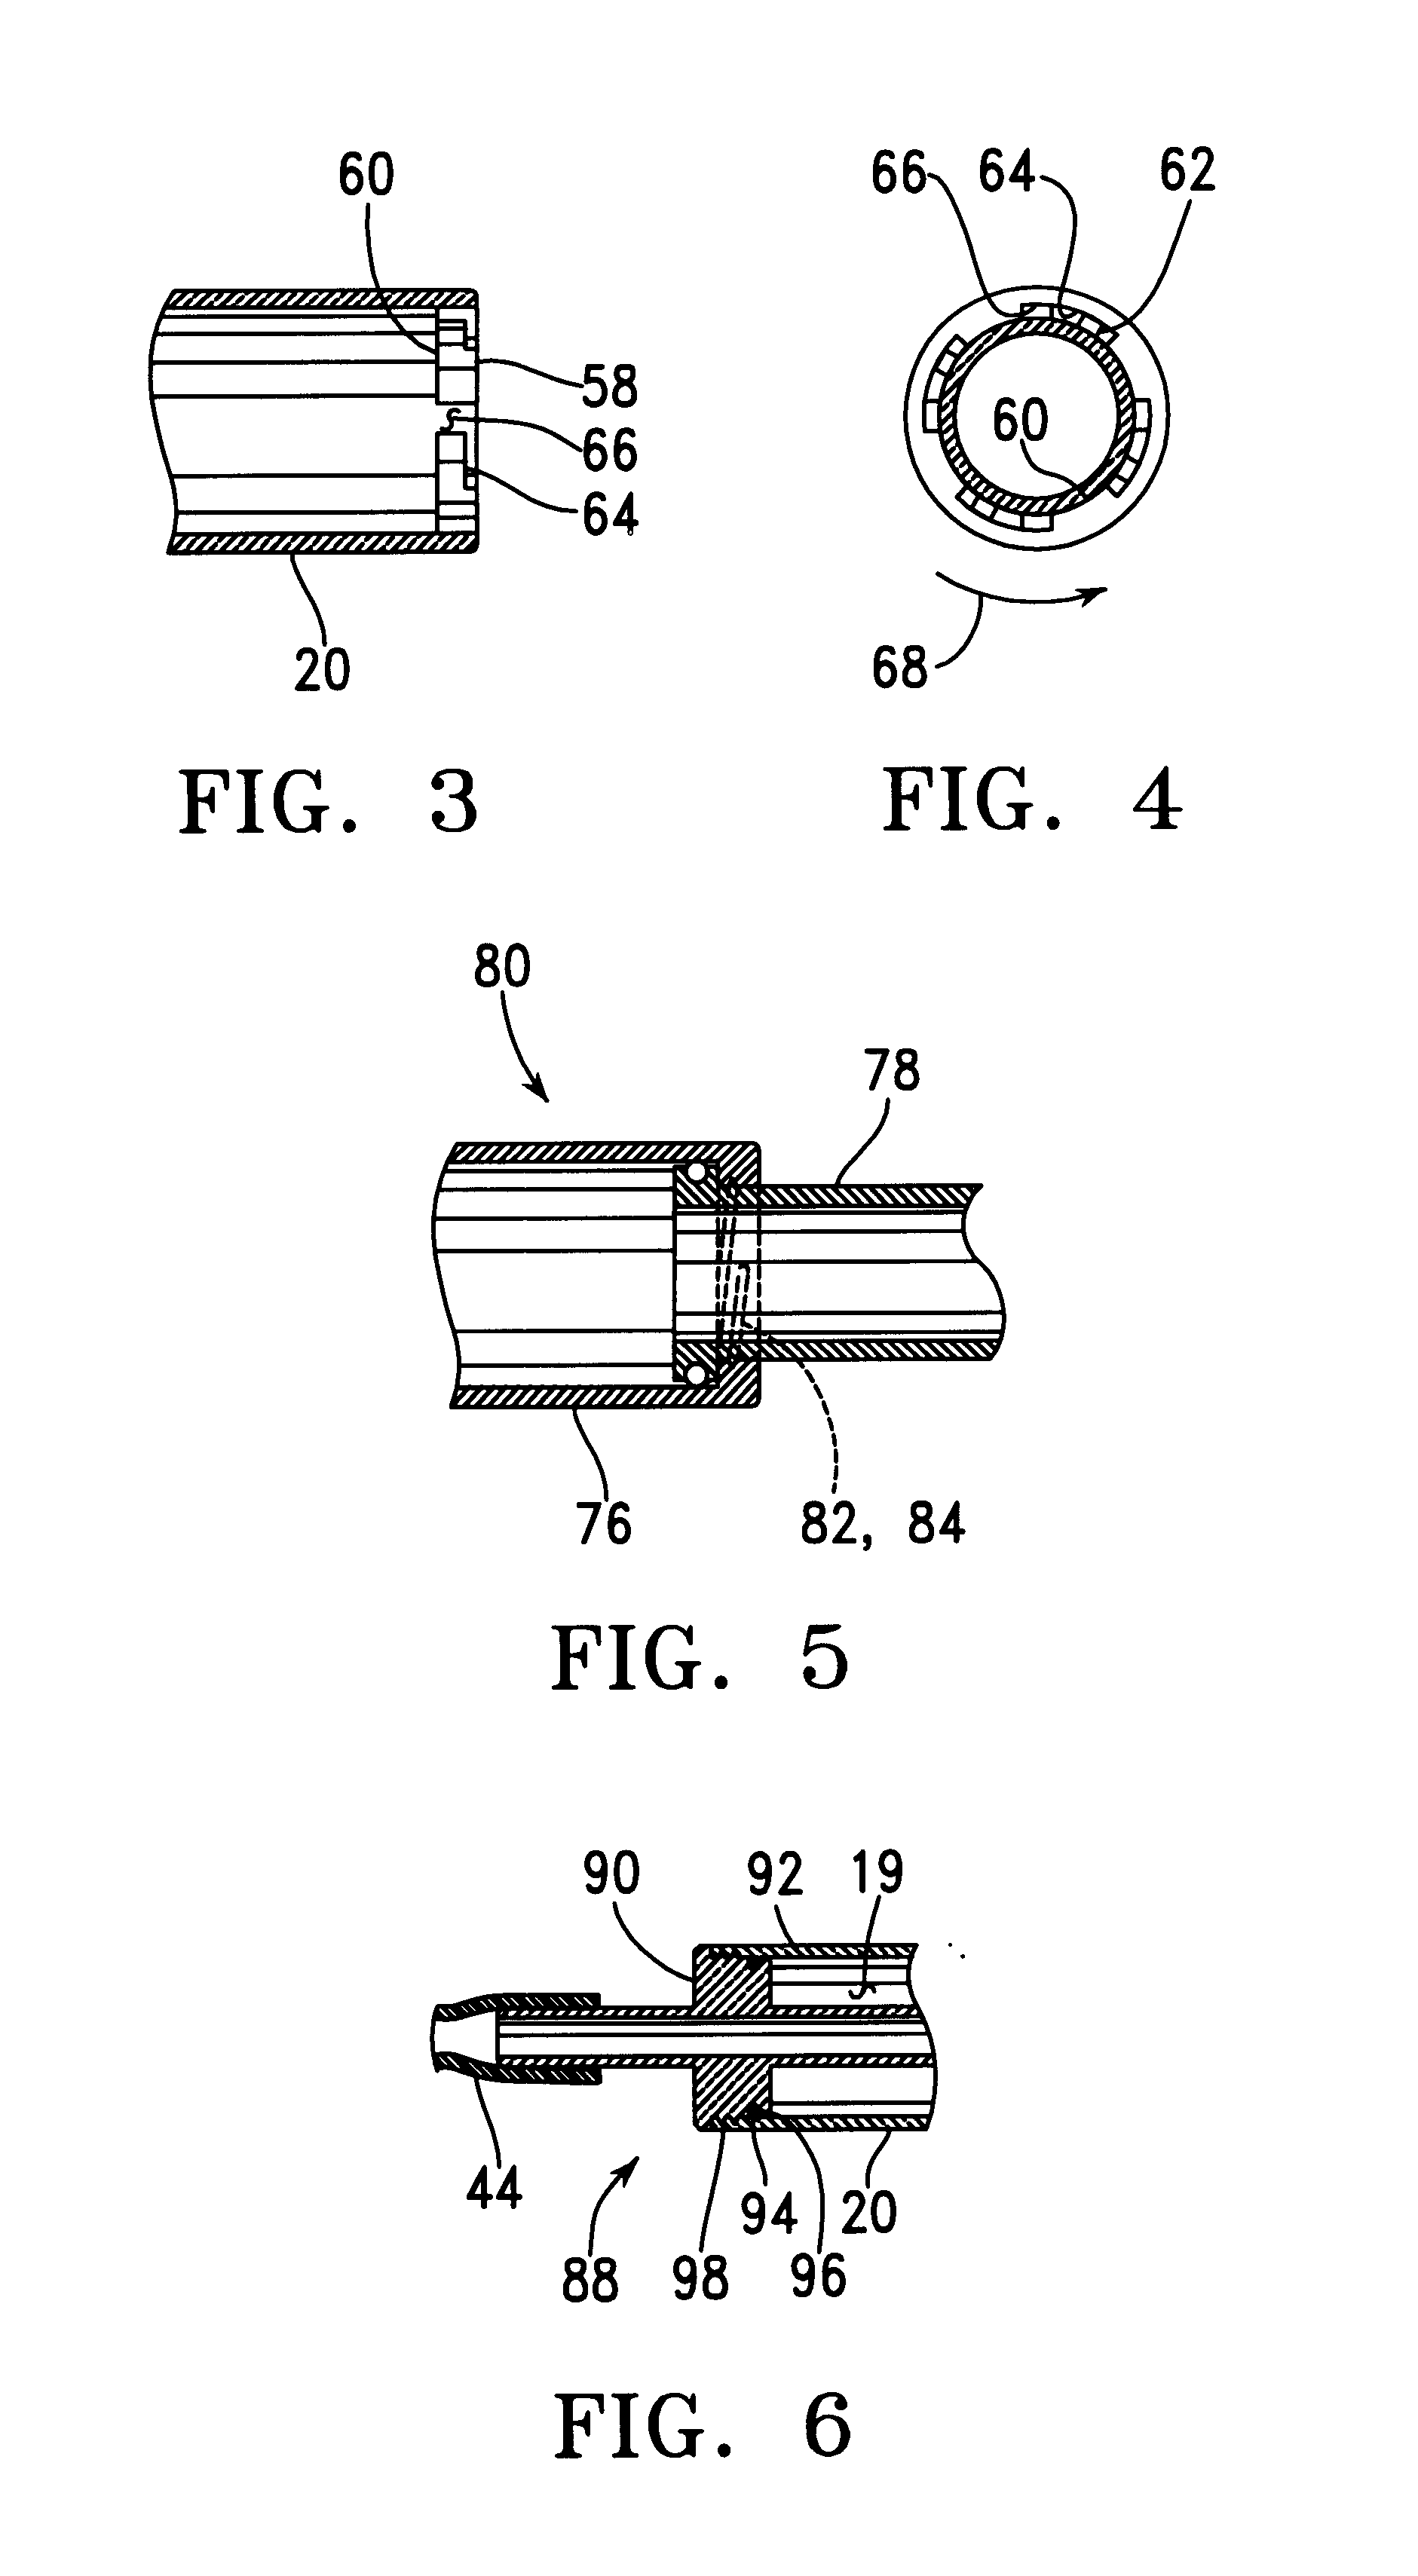 Surgical suction probe system with an easily cleaned internal filter